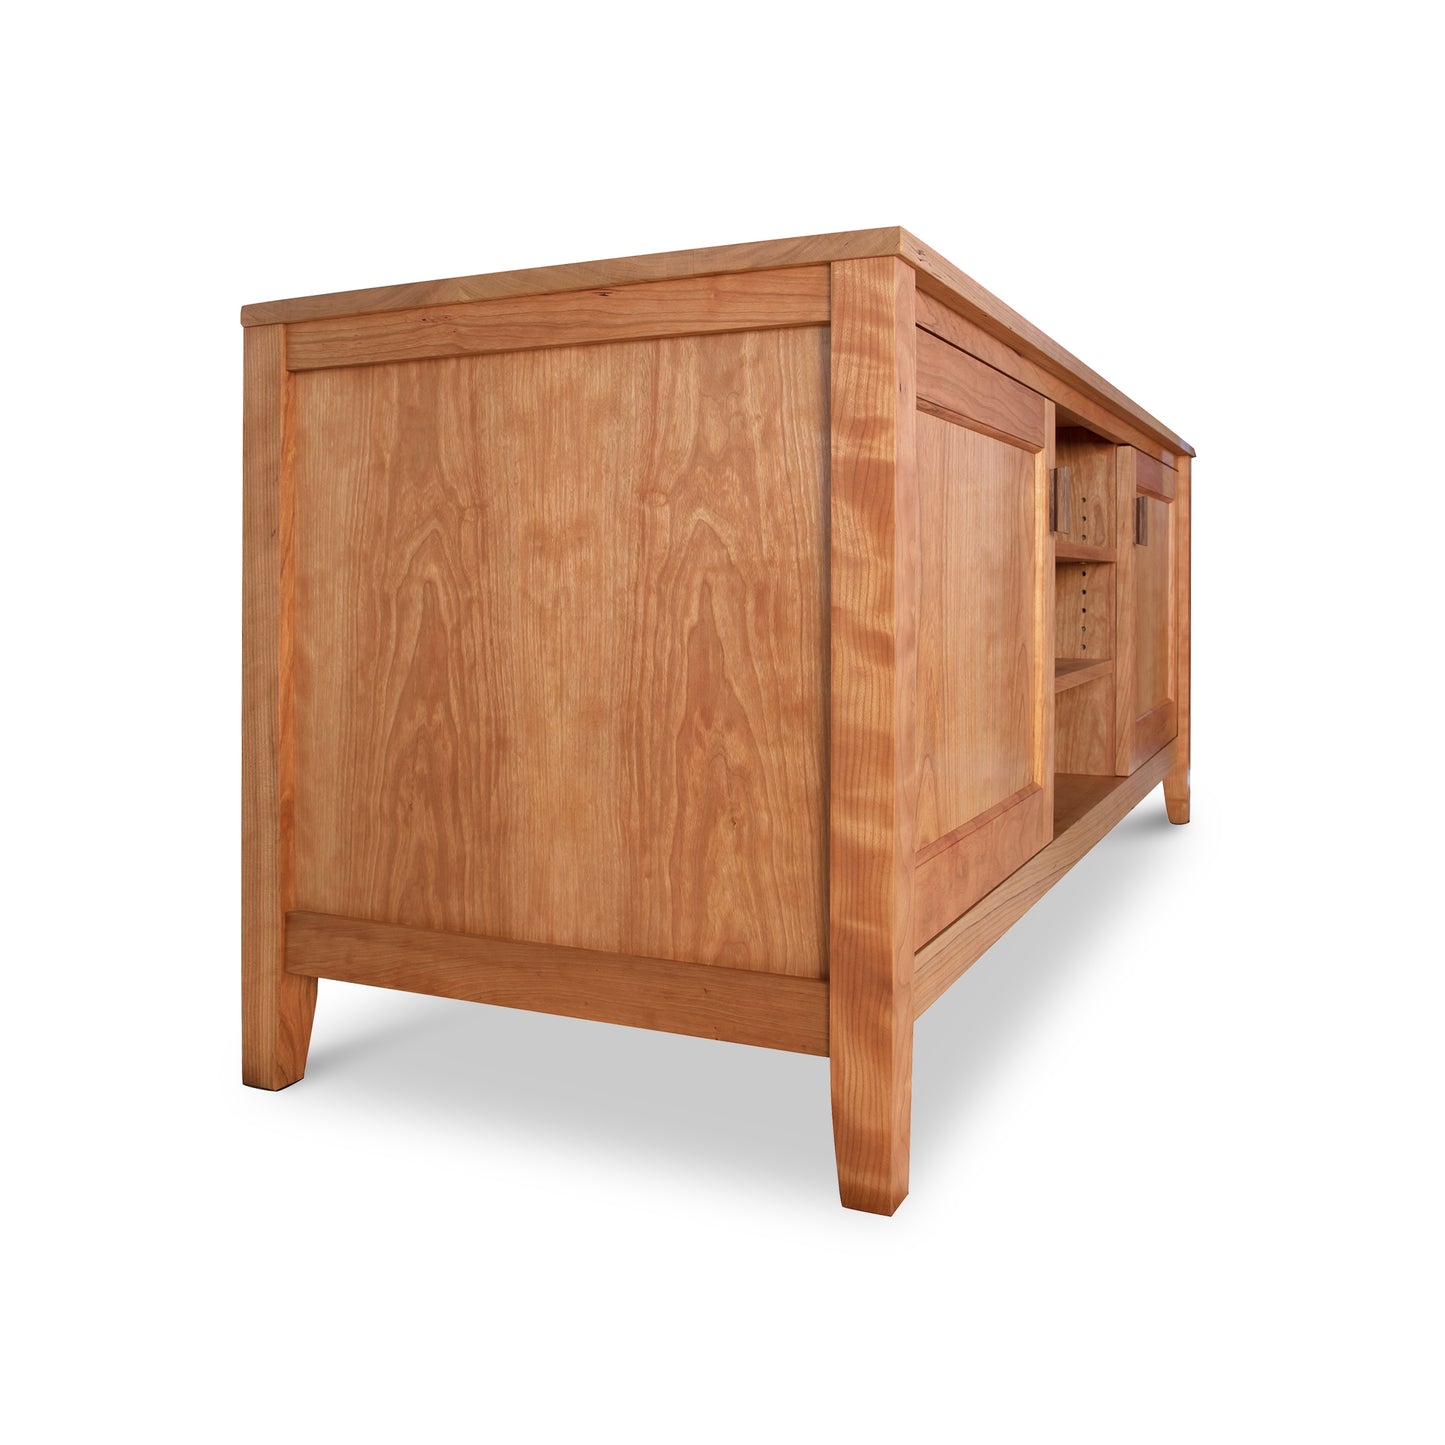 A Maple Corner Woodworks Andover Modern 64" TV Stand with a smooth finish, featuring panelled sides and two rows of small drawers at one end. This Vermont craftsmanship piece is isolated on a white background.